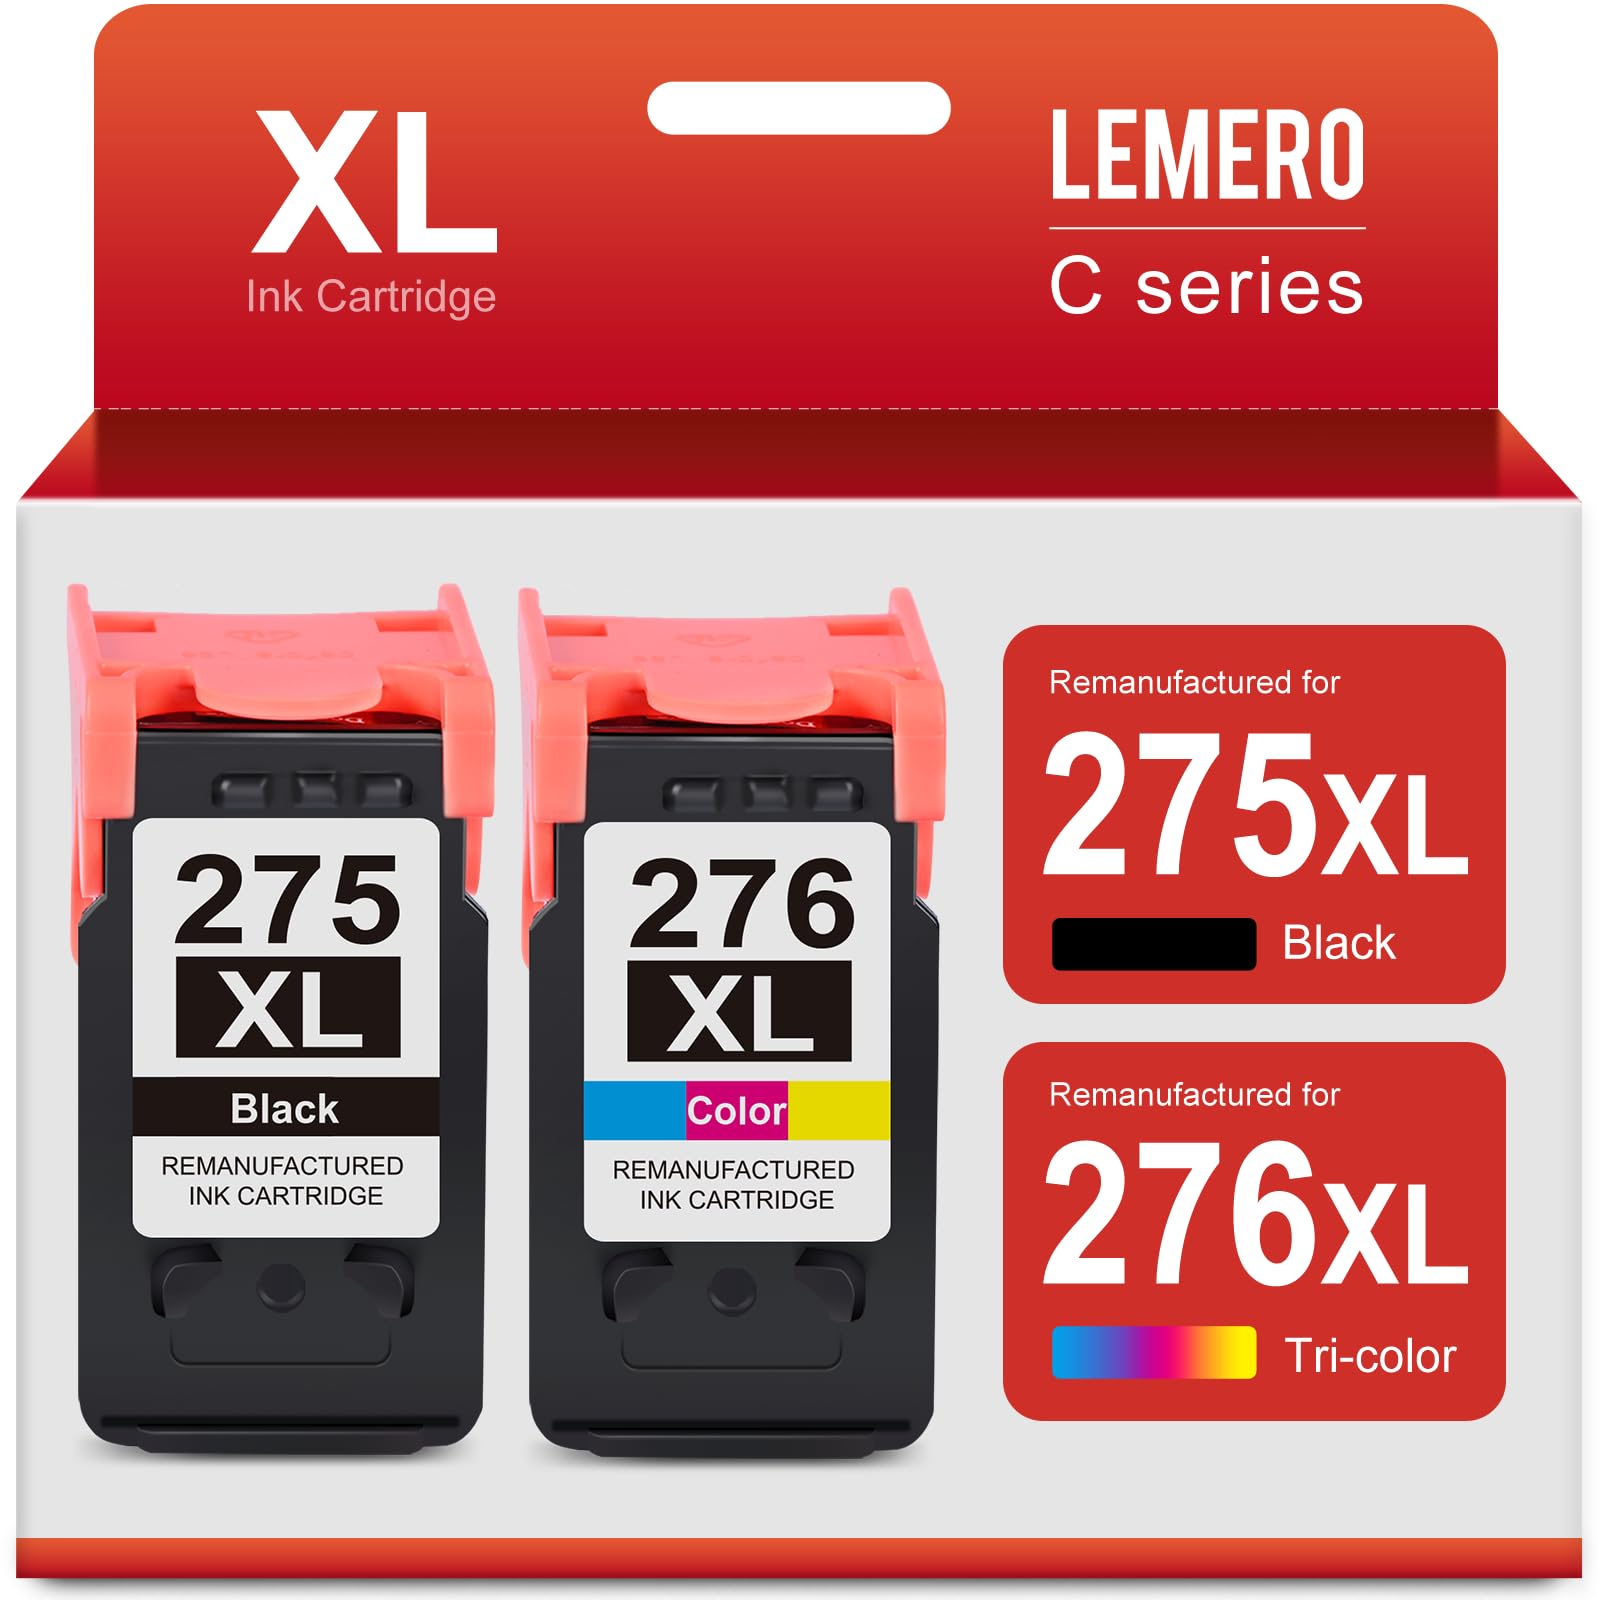 LEMERO ink cartridges 275XL and 276XL shown alongside a Canon Pixma printer, emphasizing compatibility and the update chip for a perfect fit.